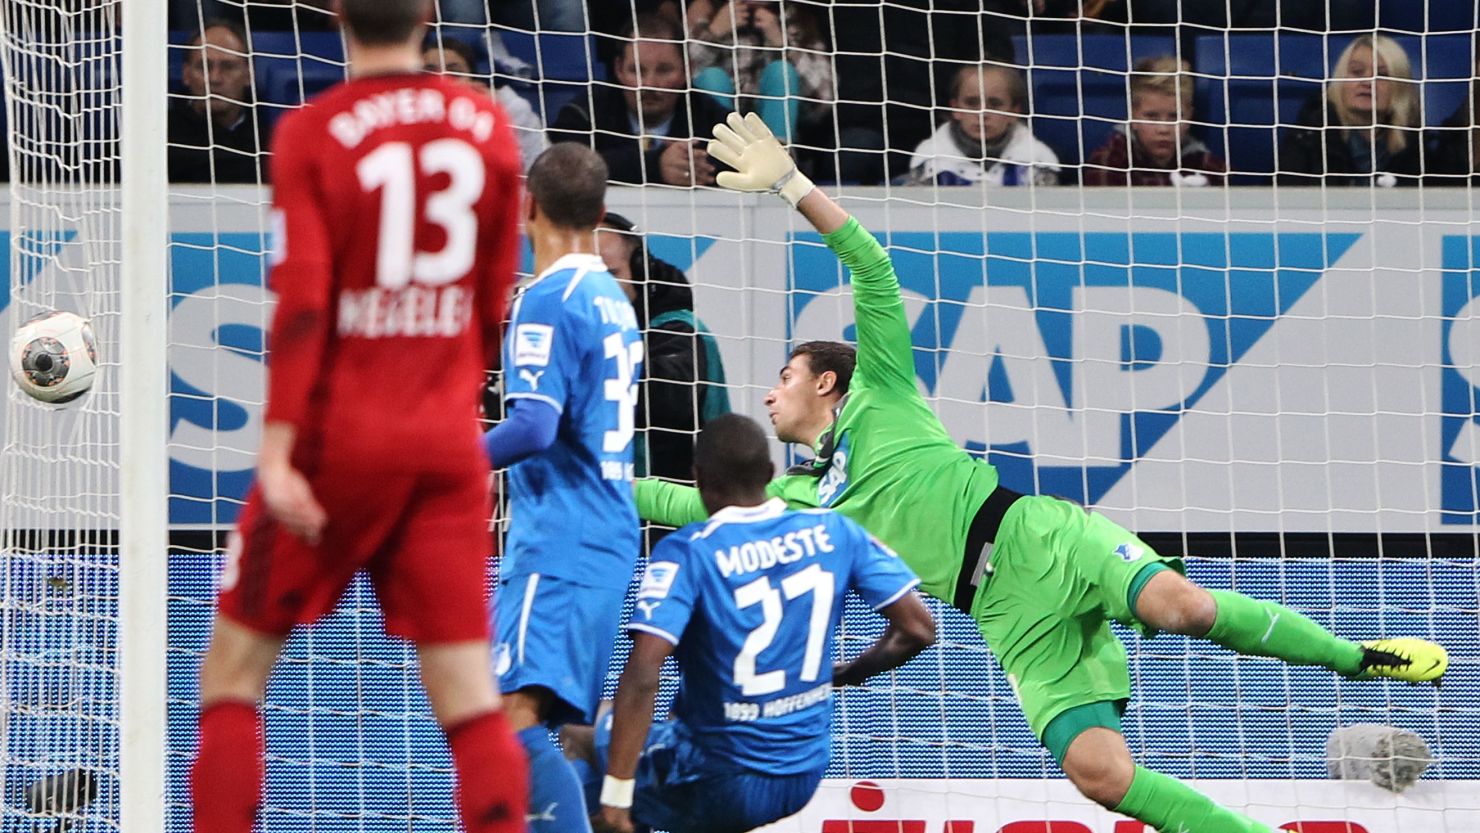 Stefan Kiessling was awarded a goal against Hoffenheim even though his header went in through the side netting. 